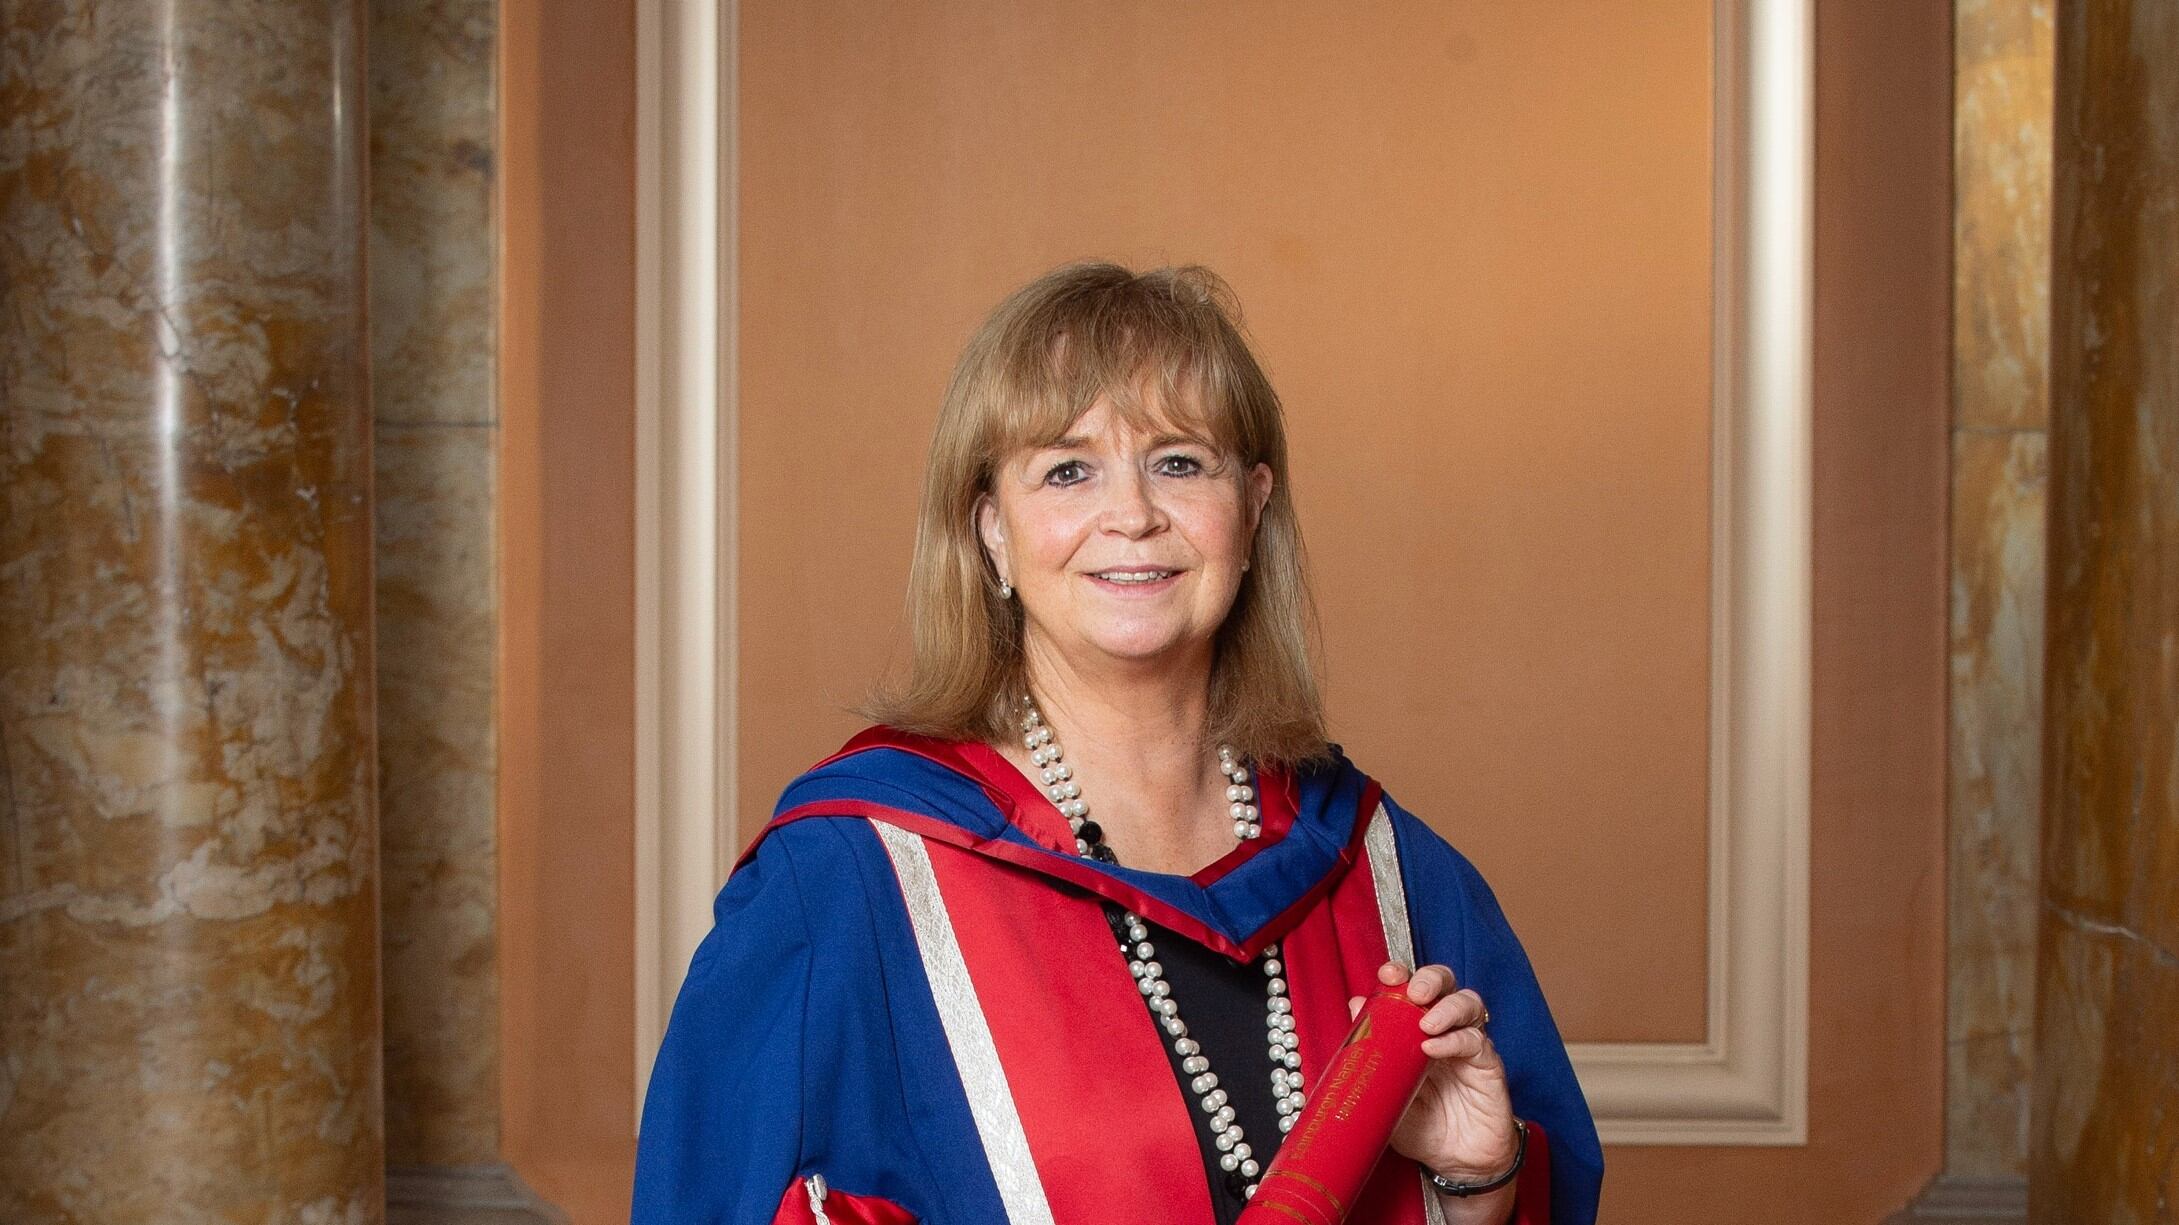 Dame Elish Angiolini has been awarded an honorary doctorate